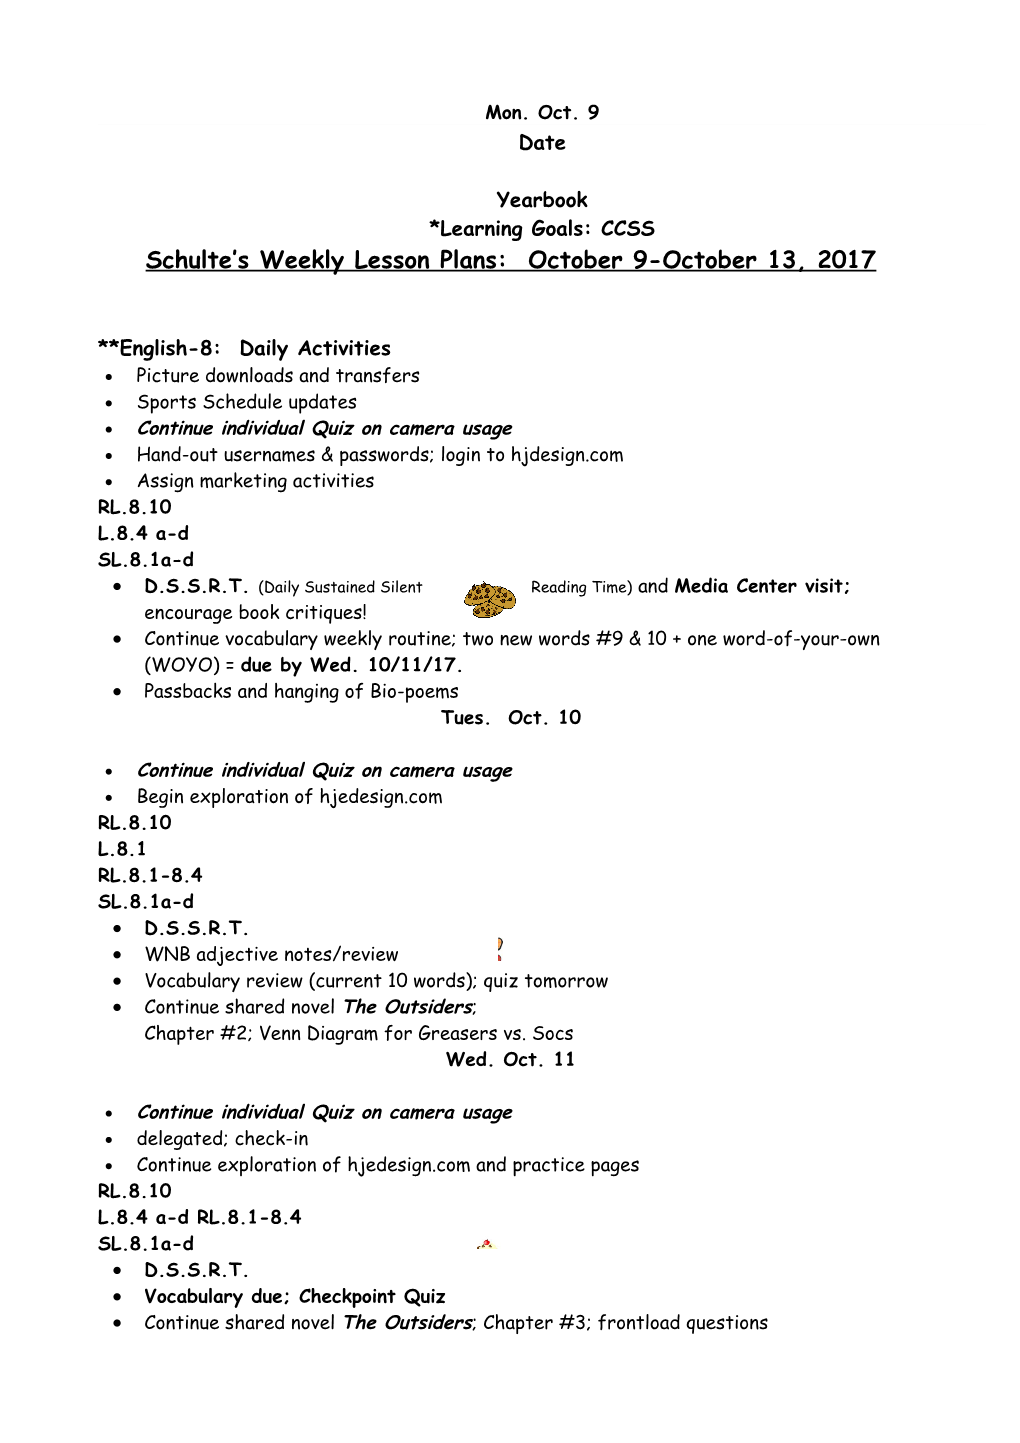 Schulte S Weekly Lesson Plans: October 9-October 13, 2017